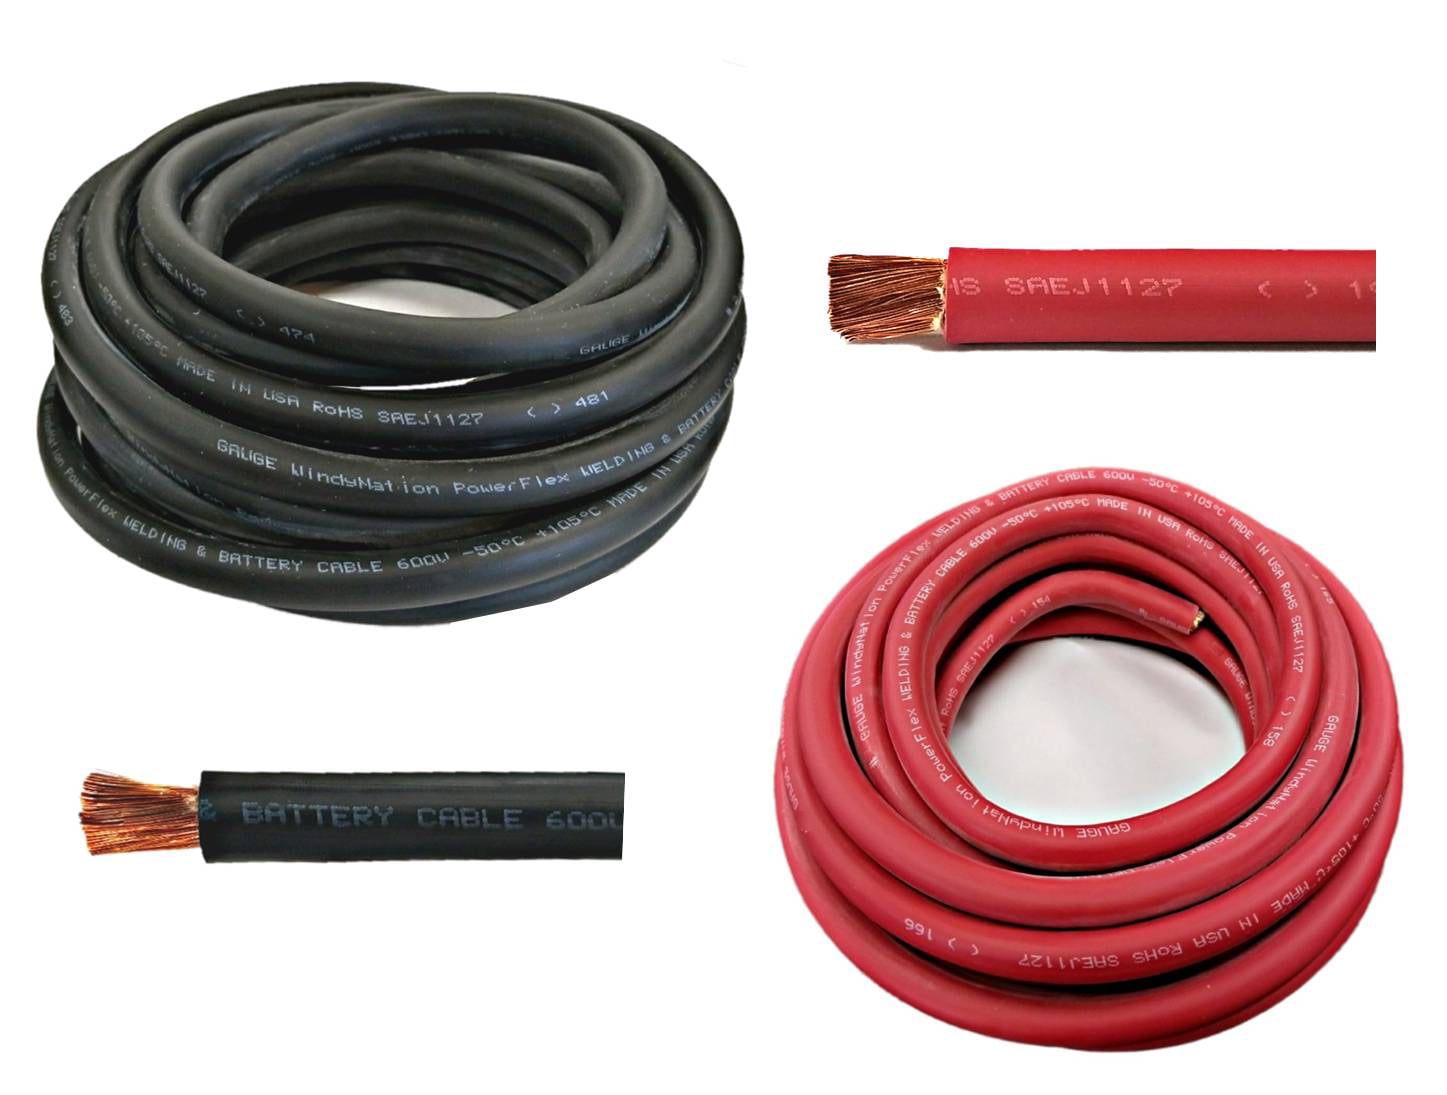 WELDING CABLE 2/0 30' 15' BLACK 15'RED FT BATTERY LEADS USA NEW Gauge Copper AWG 